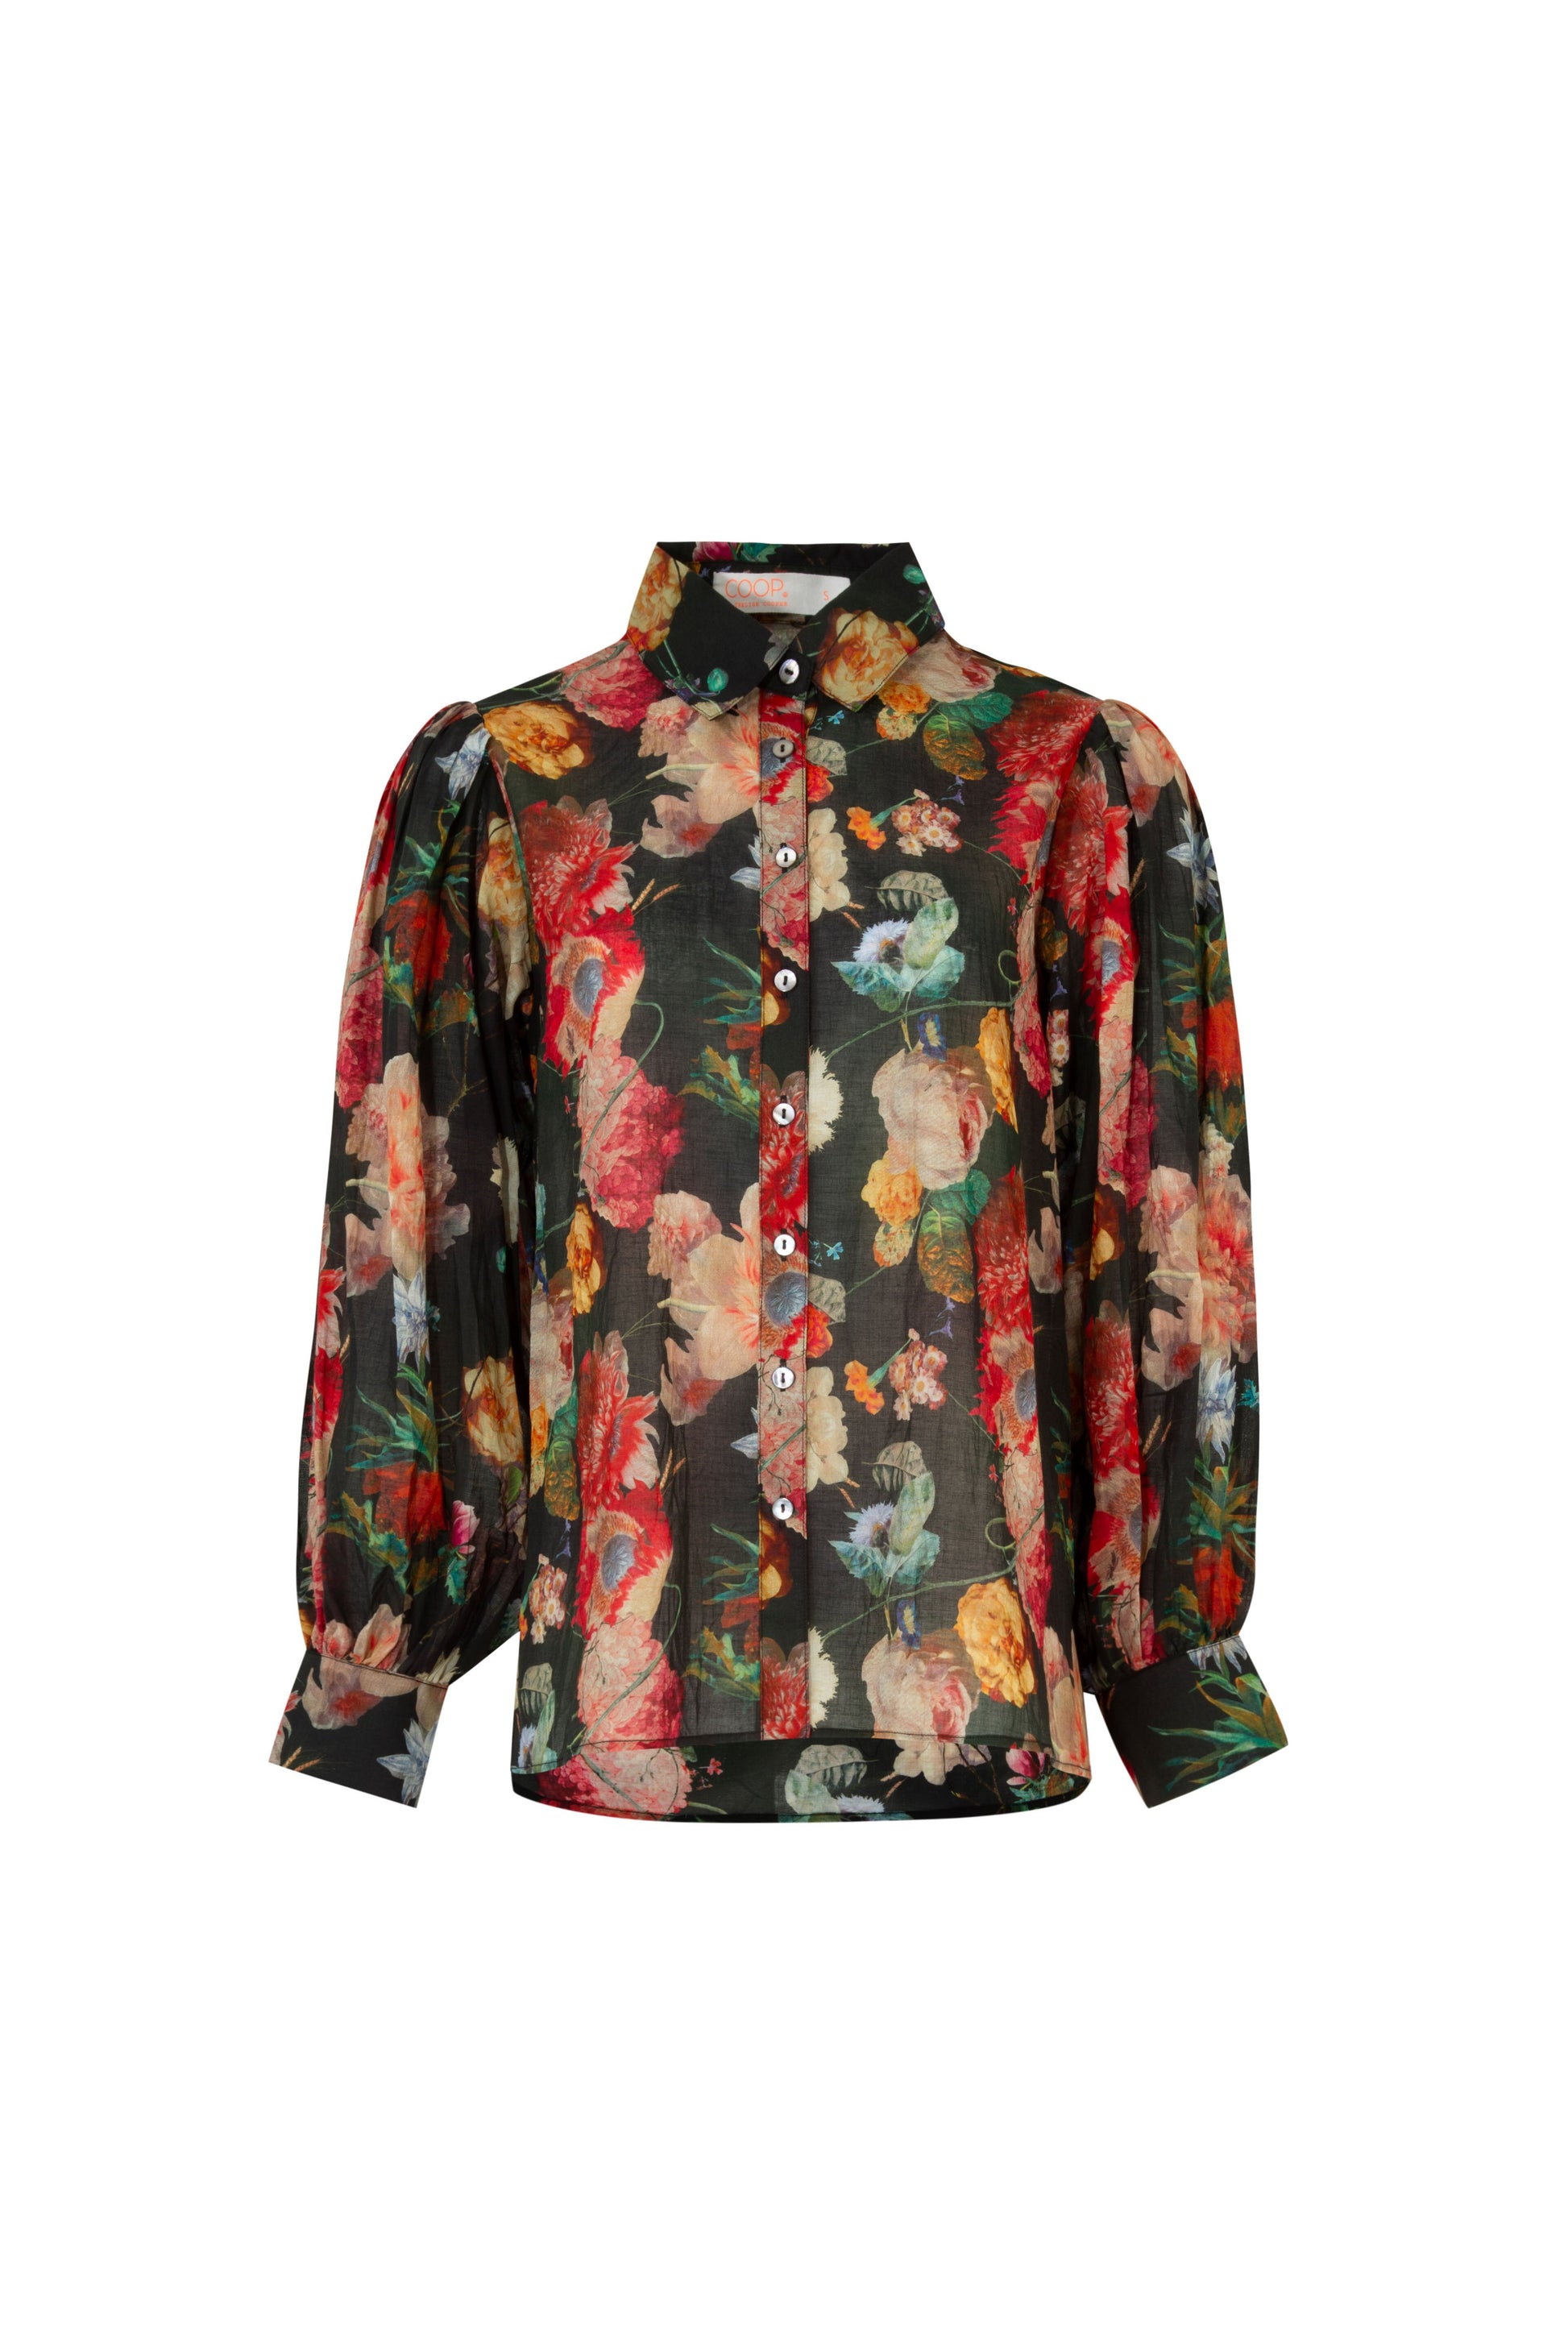 COOP AUTUMN SLEEVES BLOUSE - FLORAL - THE VOGUE STORE